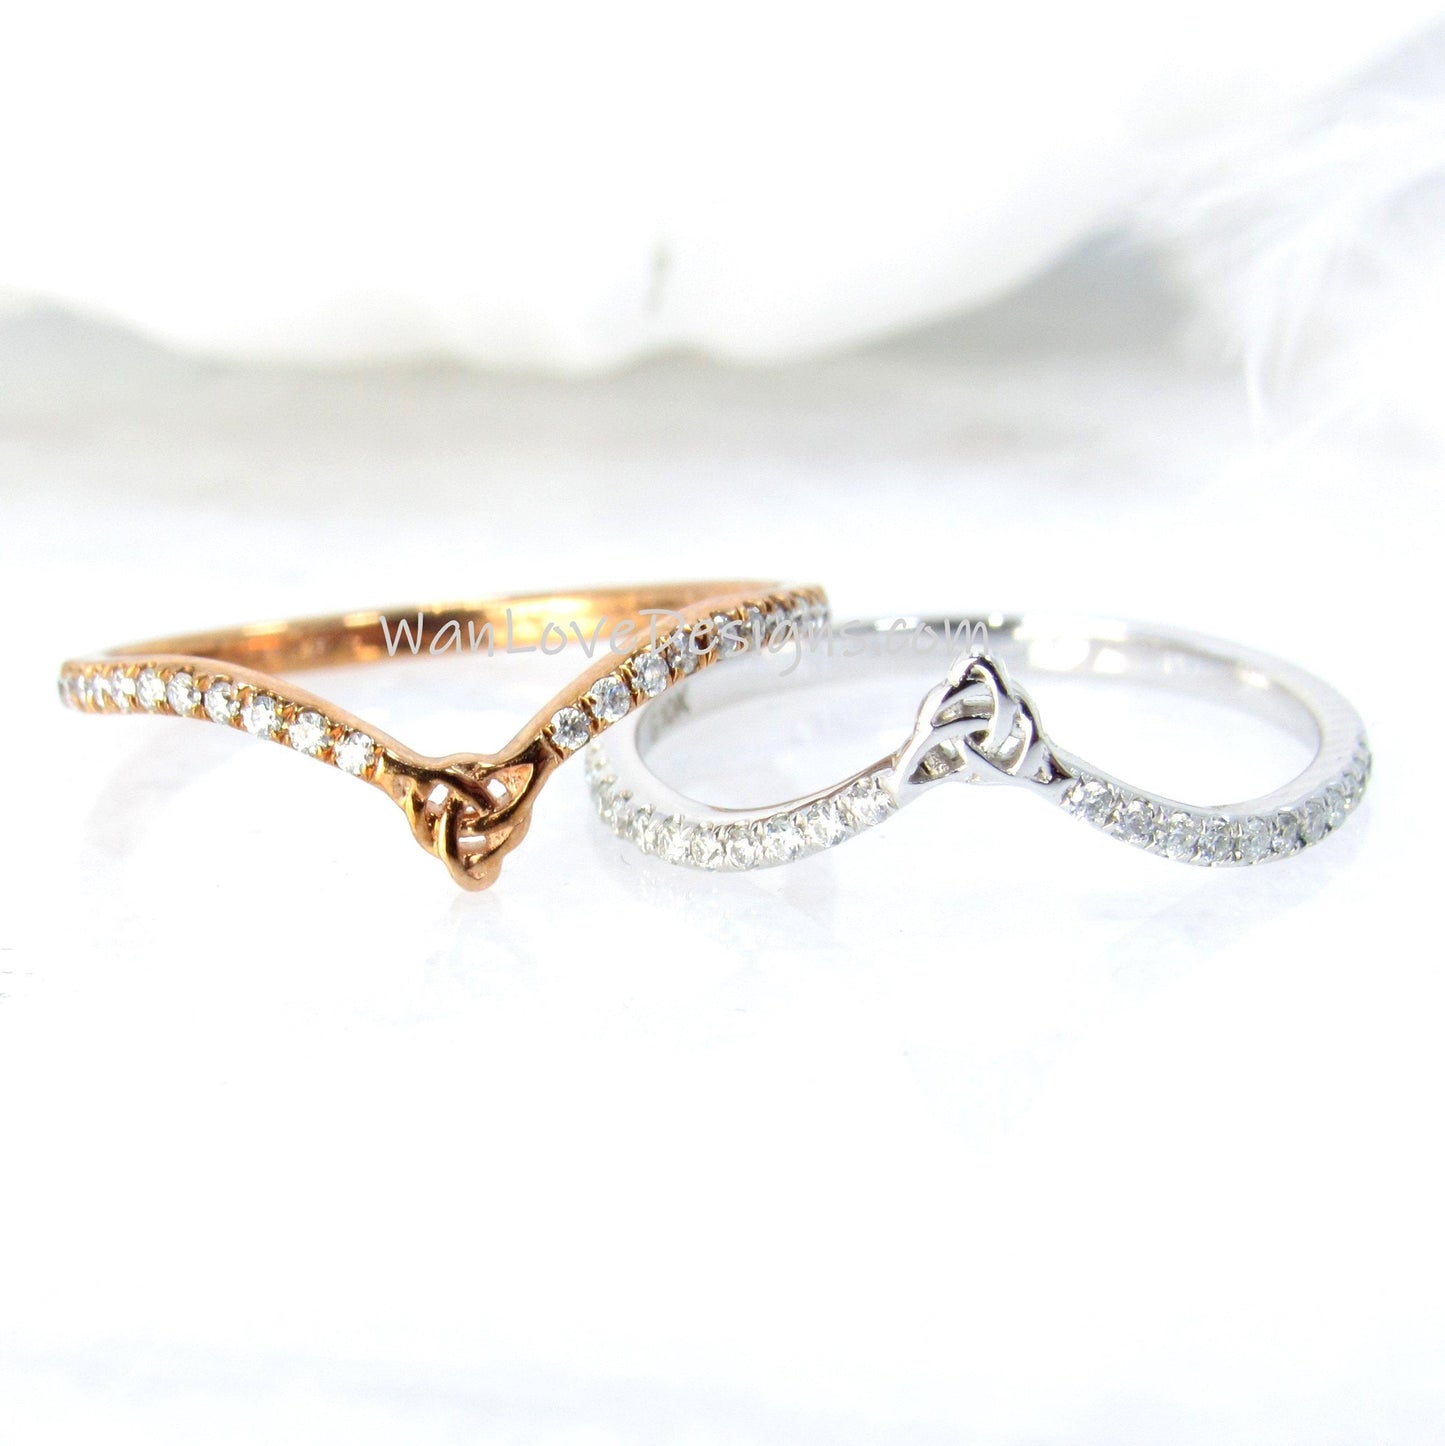 Curved Celtic Stacking Ring • Diamond Chevron Ring, Thin Gold Minimalist Ring • Dainty Engagement Ring • Gift for Her Wan Love Designs